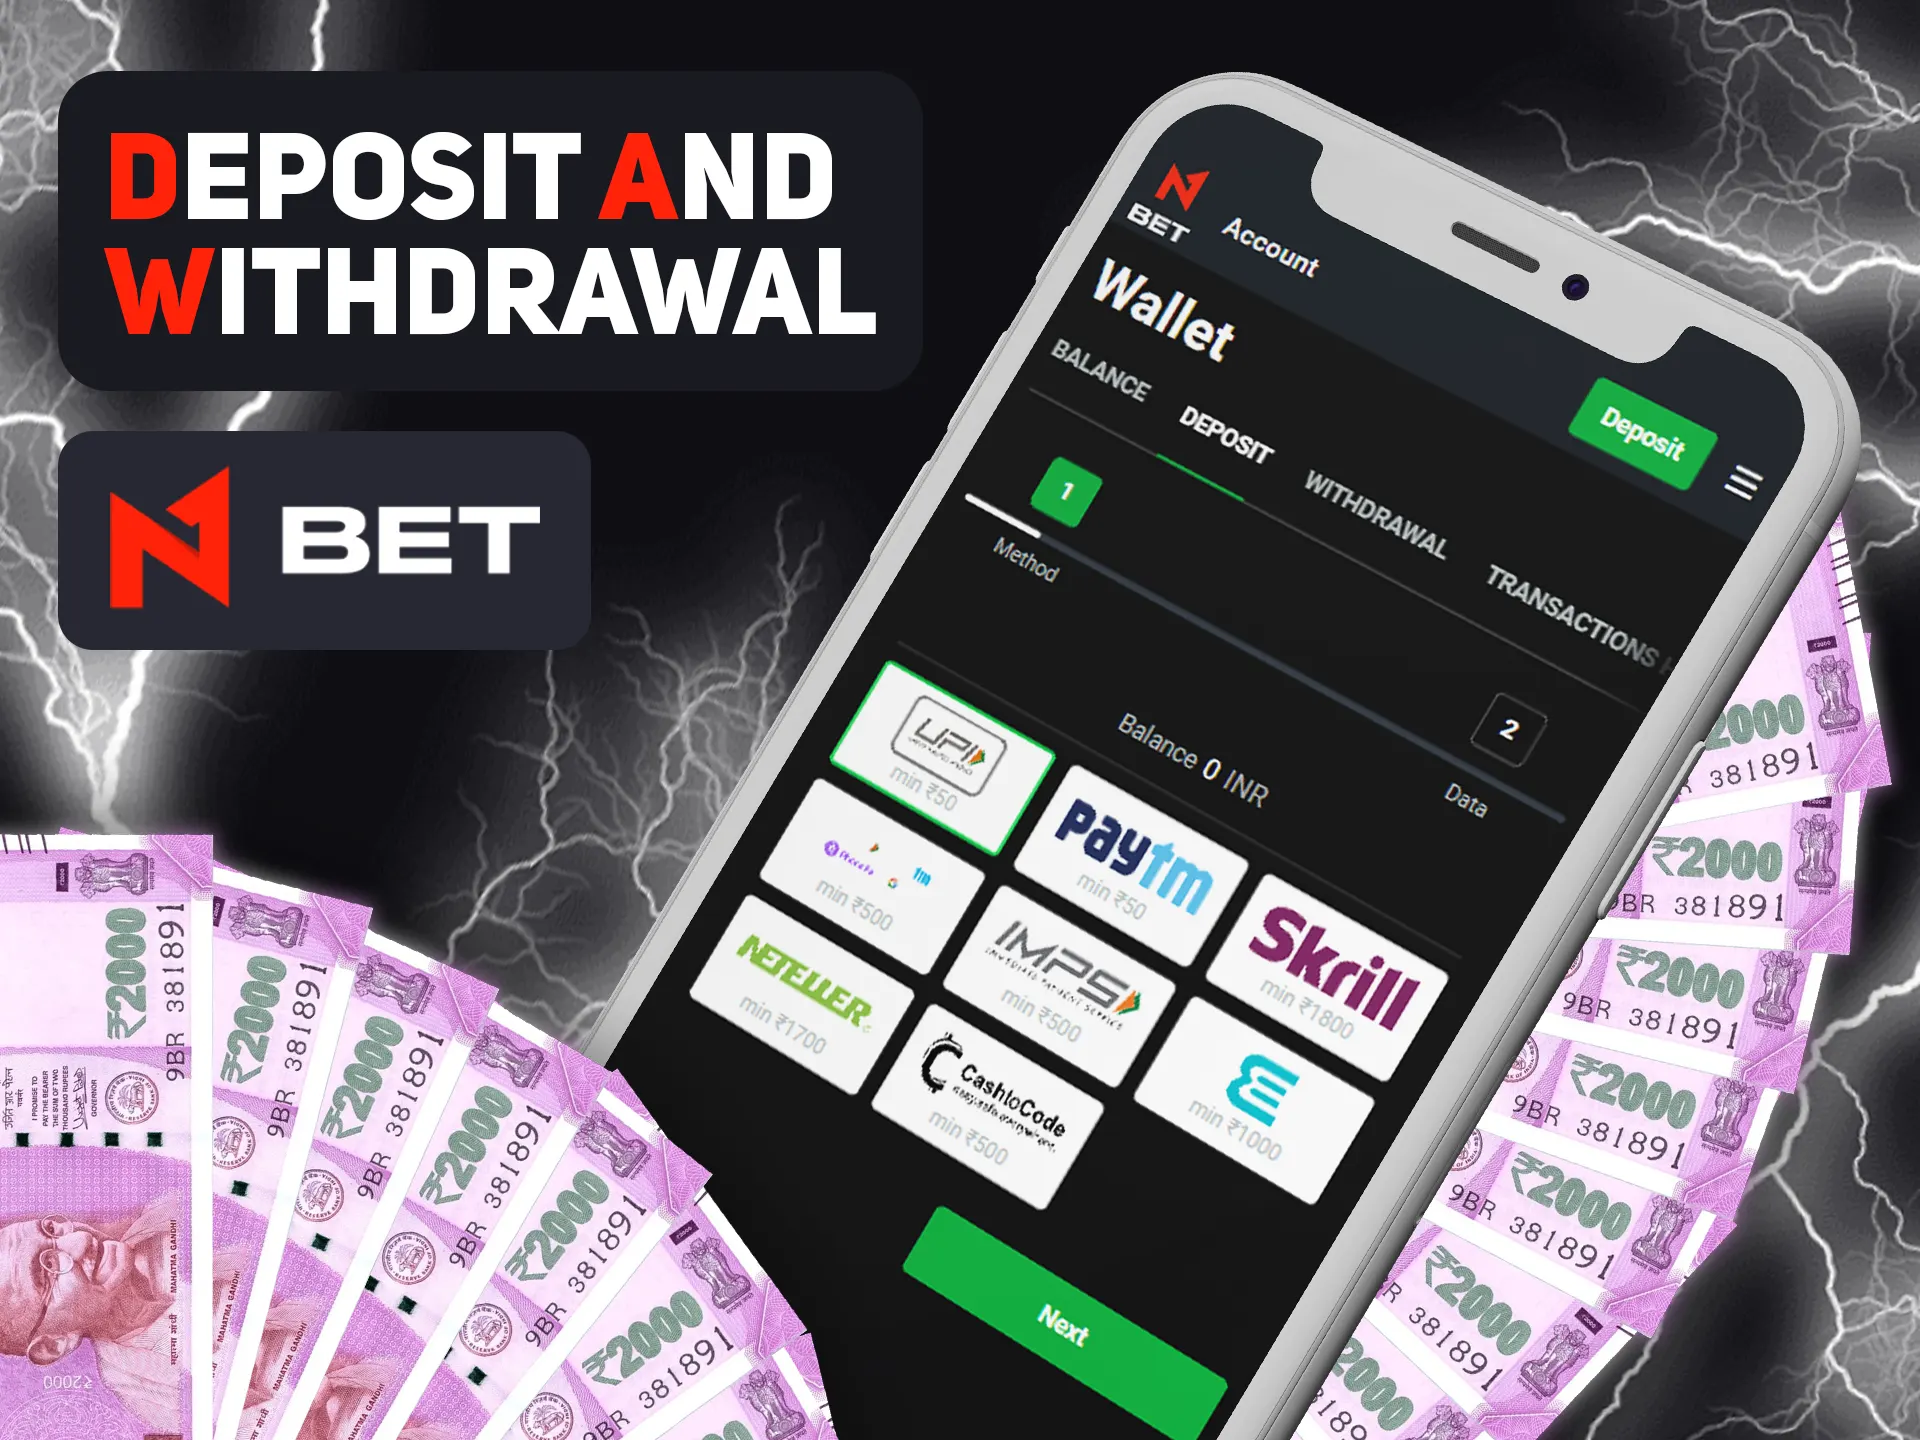 Withdraw money without difficulties using N1bet app.